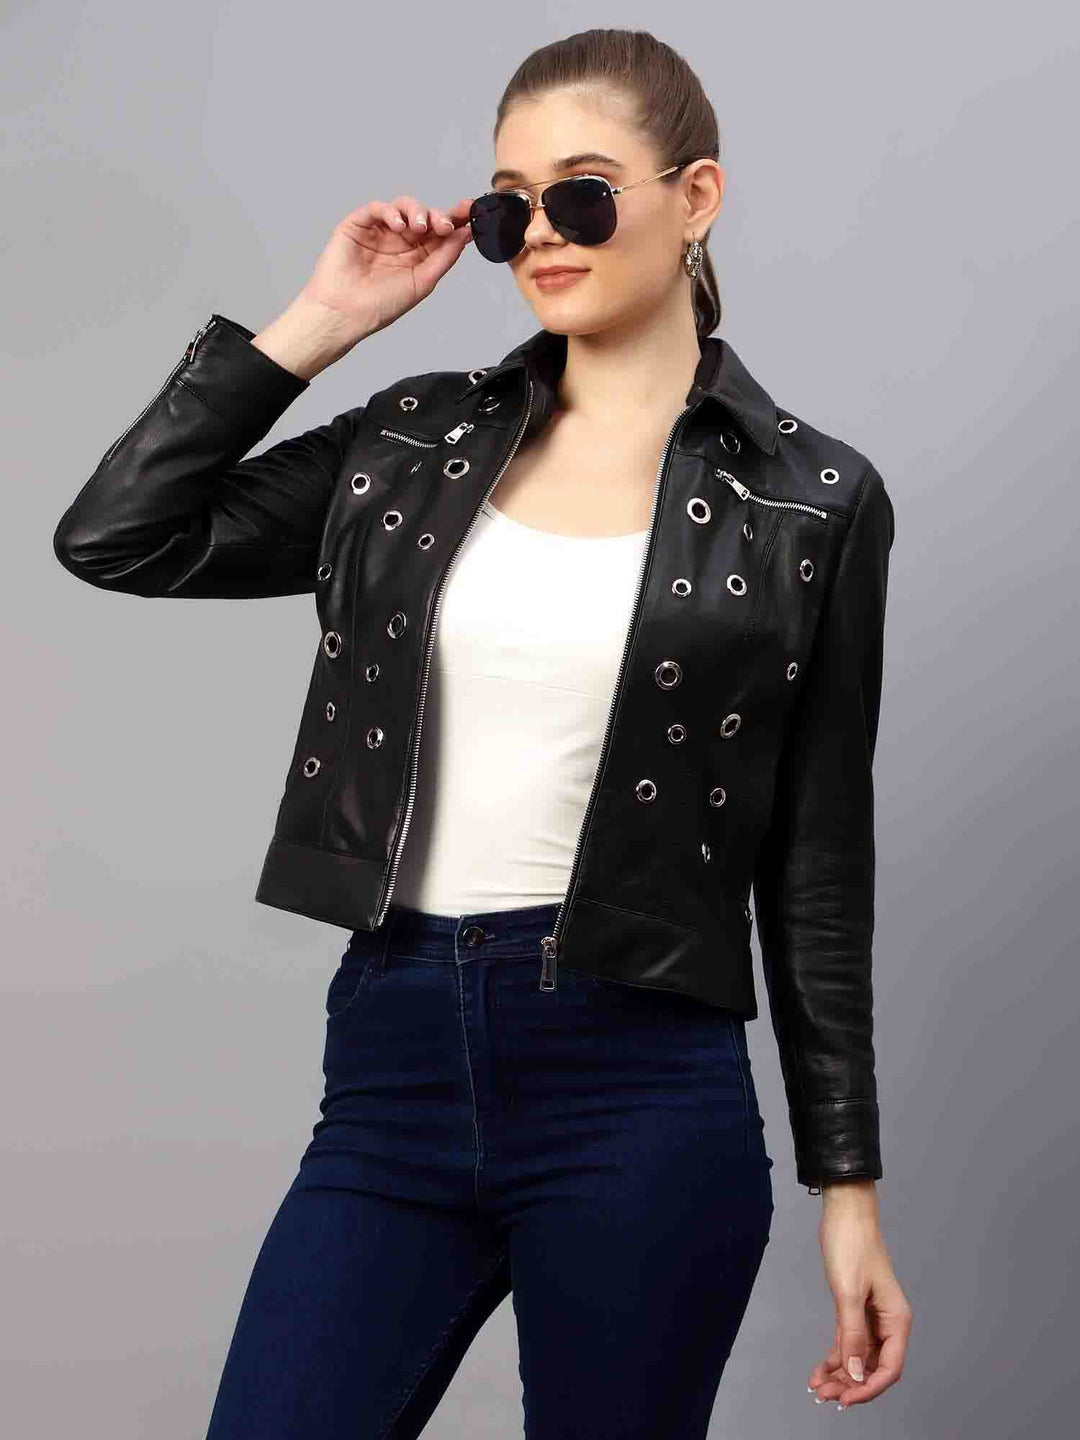 Classic Women's Leather Jacket by Saint Bryony - Sleek and Modern